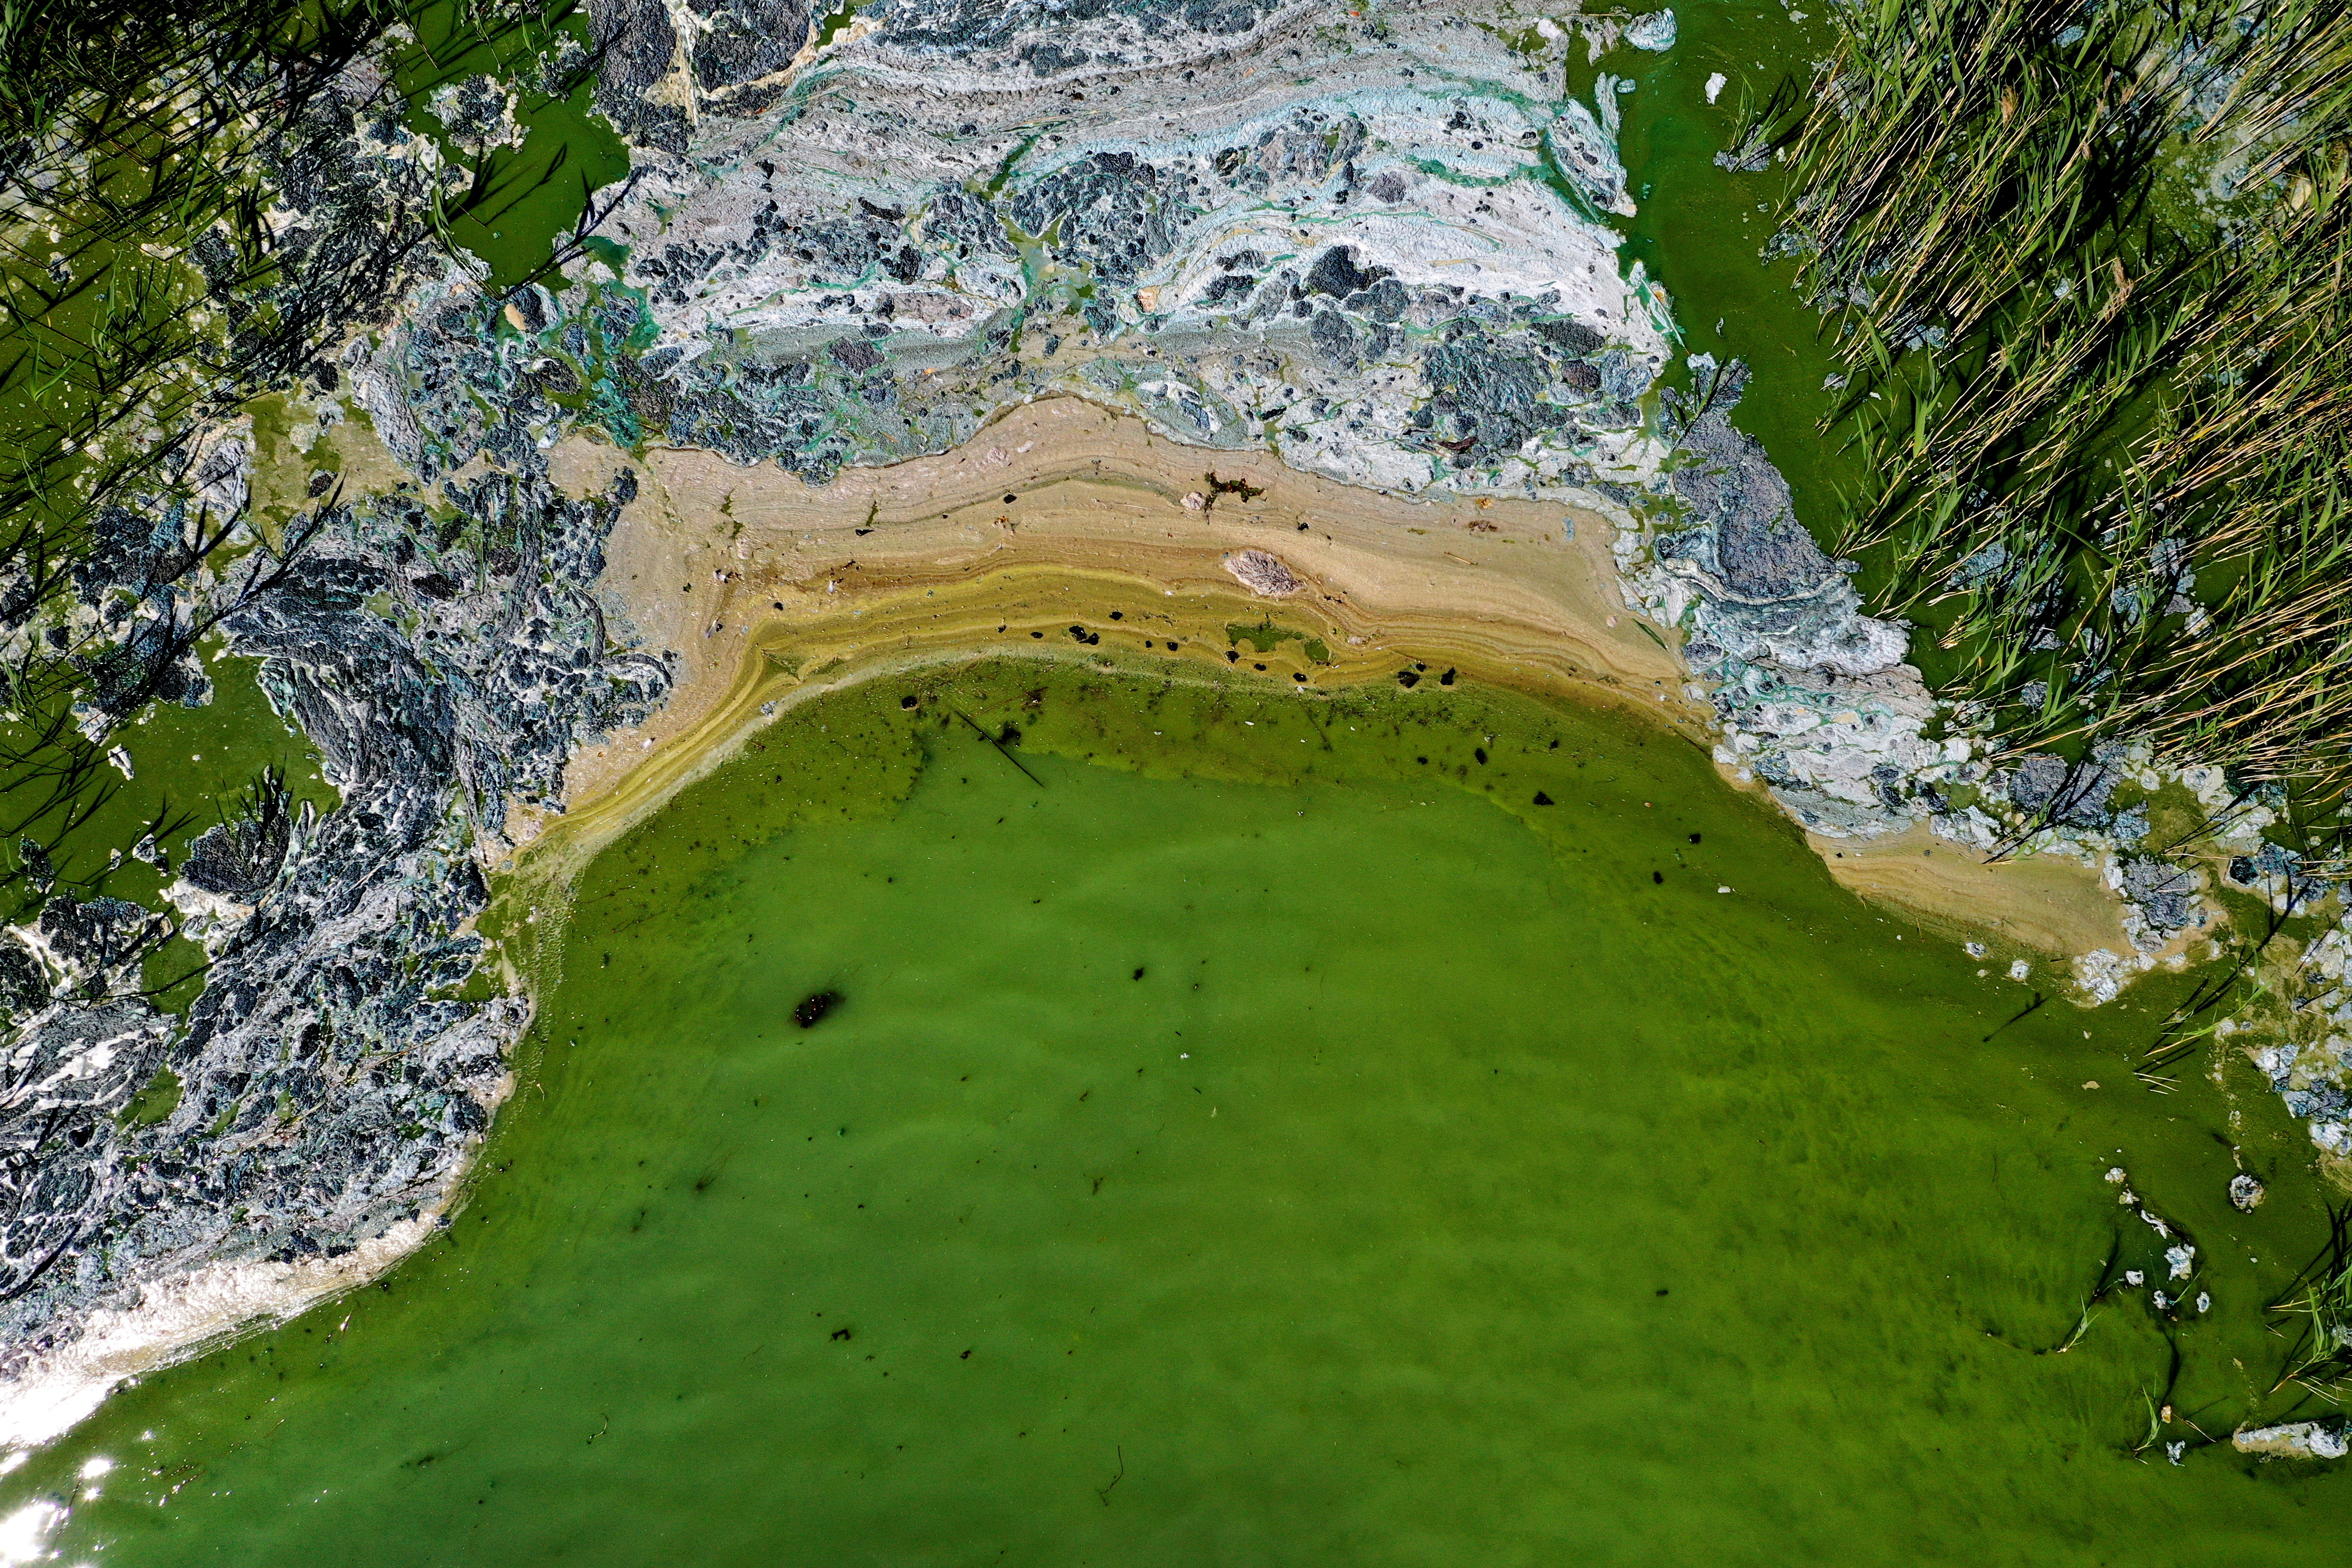 An aerial view of toxic blue-green algae bloom on the Baltic Sea coast at Tyreso near Stockholm